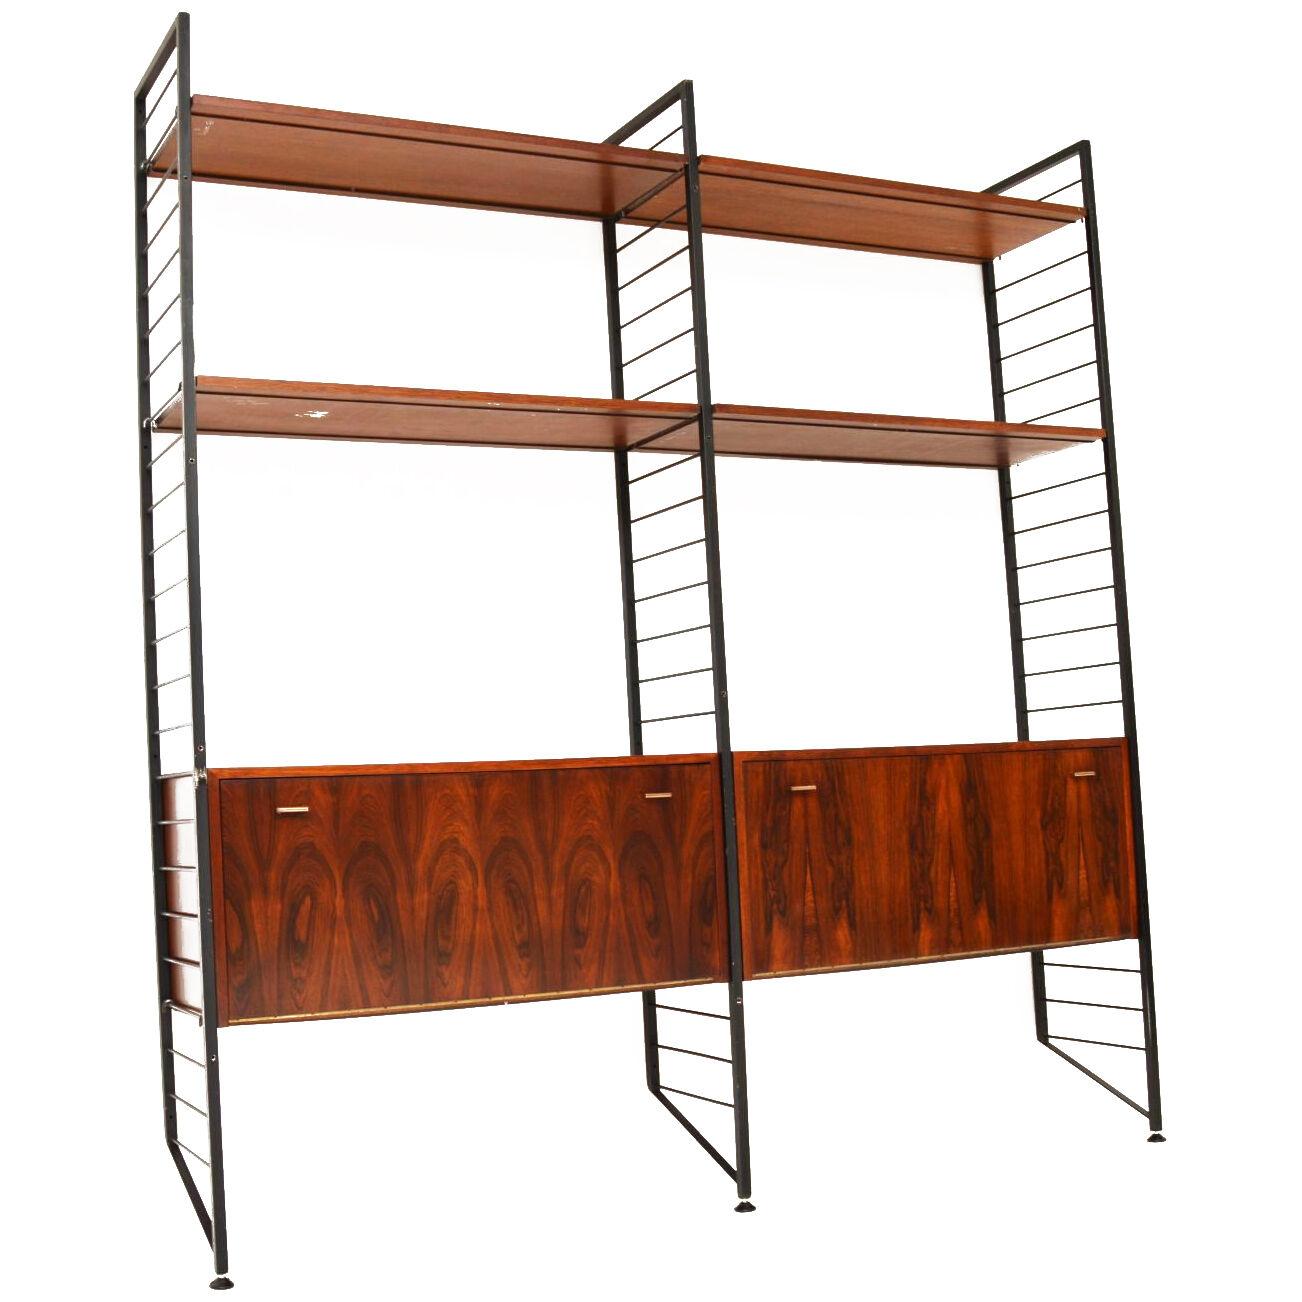 1960's Vintage Rosewood Ladderax Wall Unit Bookcase / Cabinet